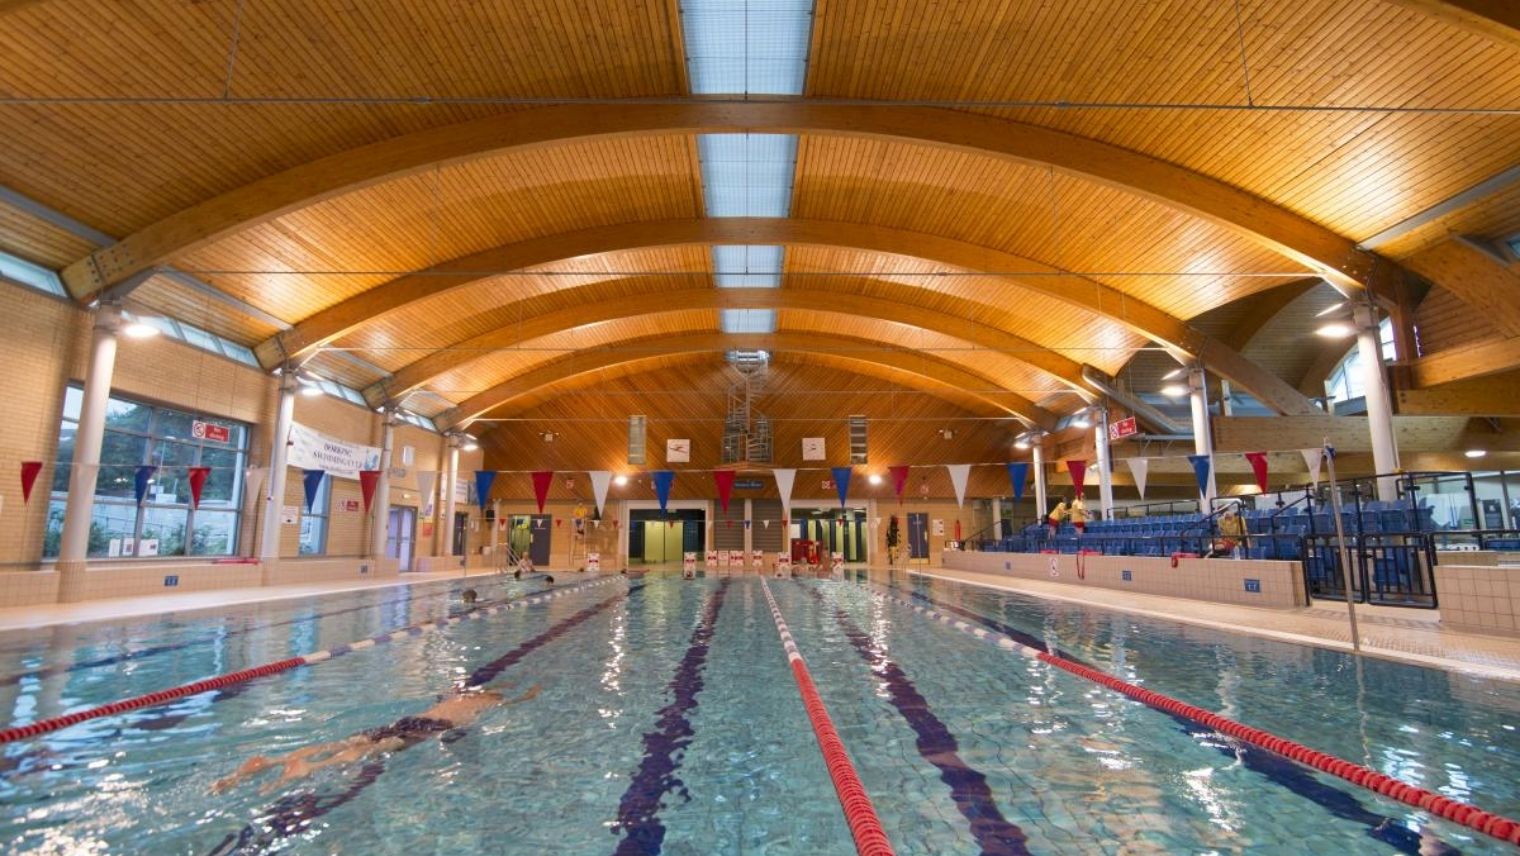 The main pool at Dorking Sports Centre